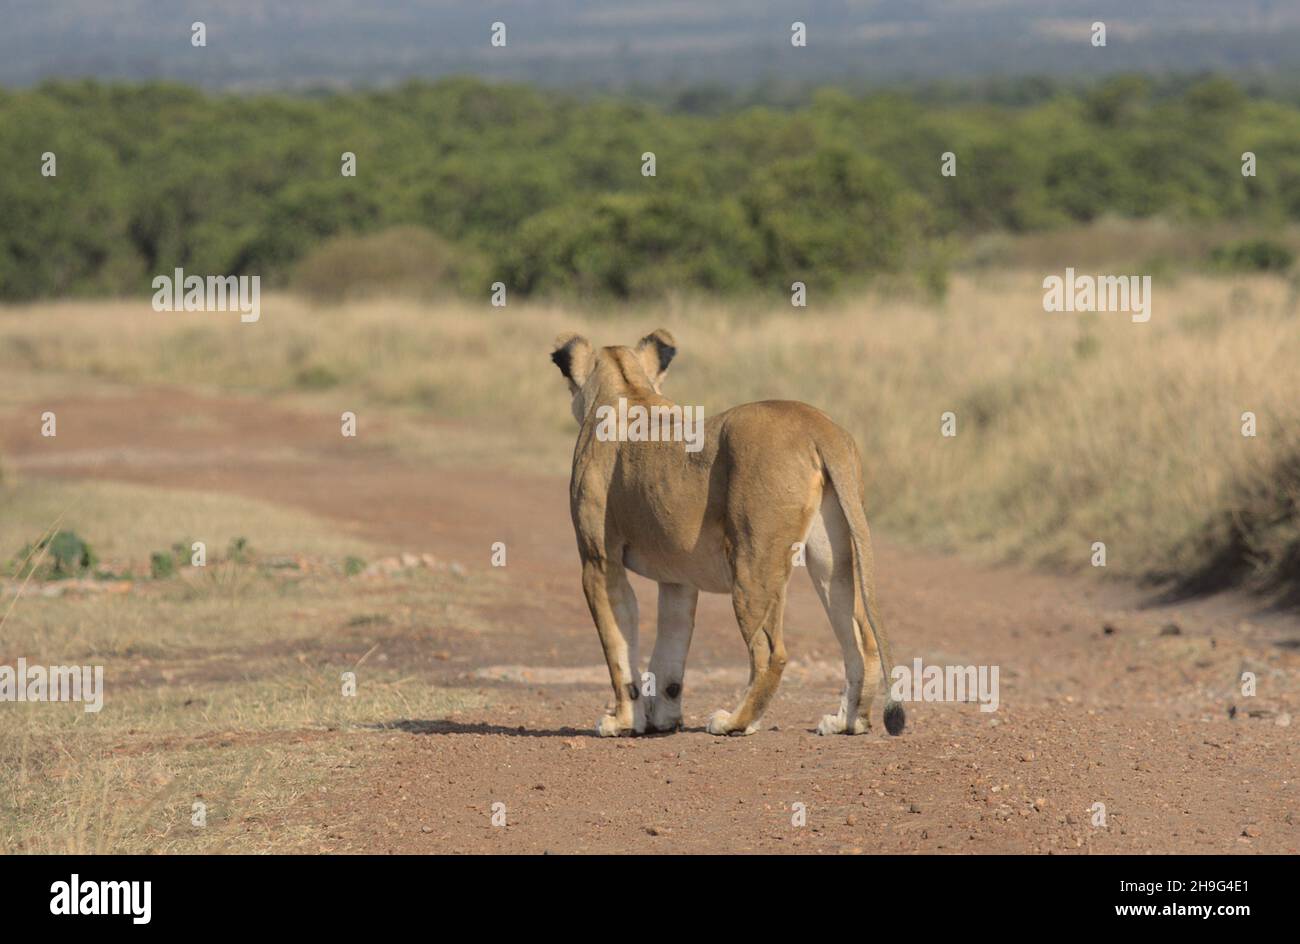 lioness standing on dirt road looking away into the distance in wild masai mara, kenya Stock Photo